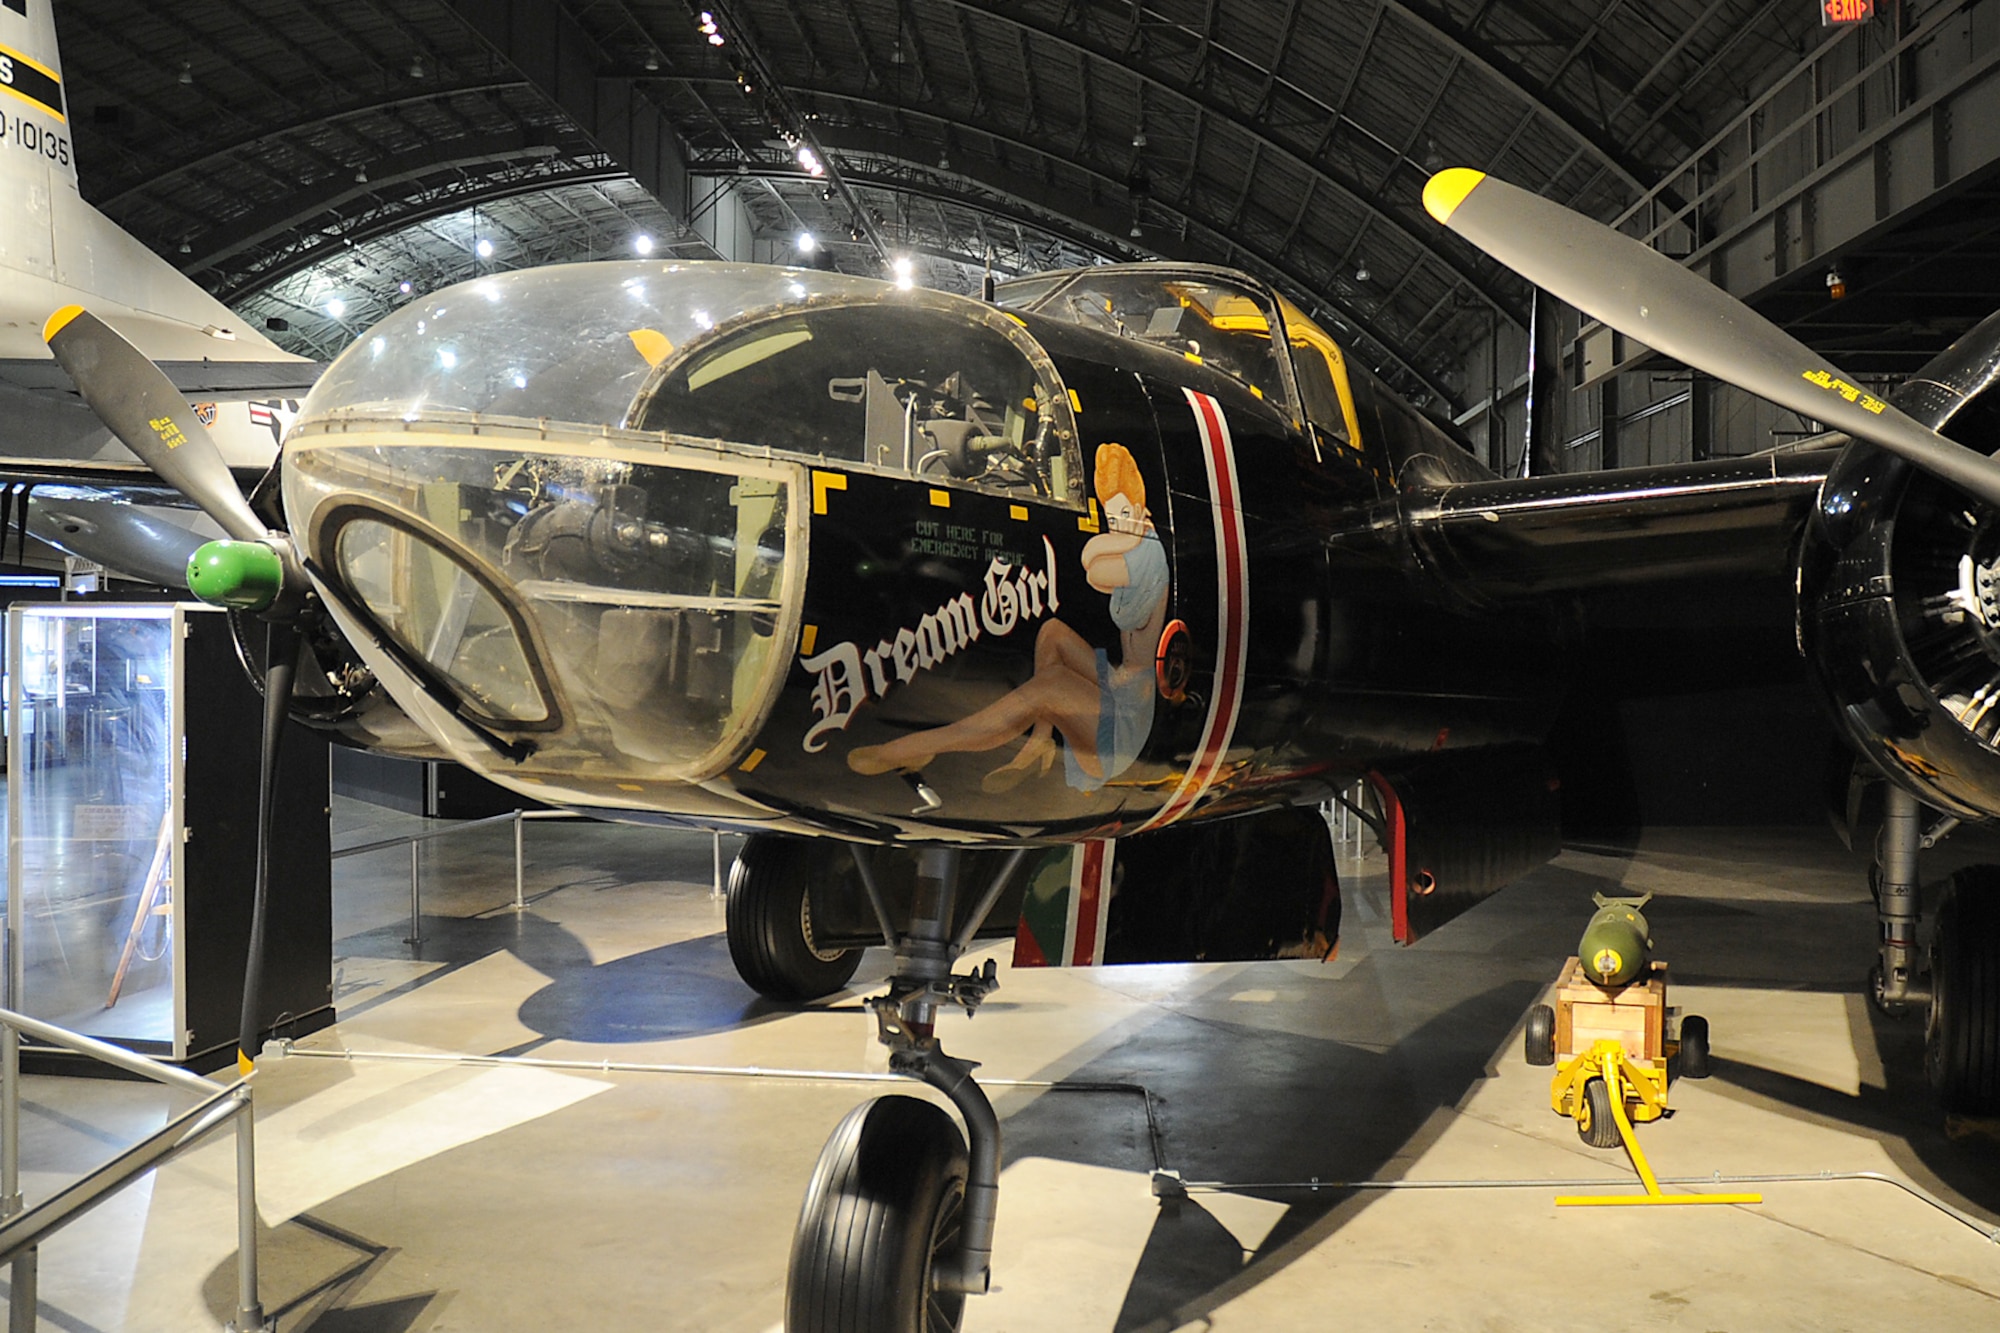 DAYTON, Ohio -- Douglas B-26C (A-26C) Invader in the Korean War Gallery at the National Museum of the United States Air Force. (U.S. Air Force photo)
